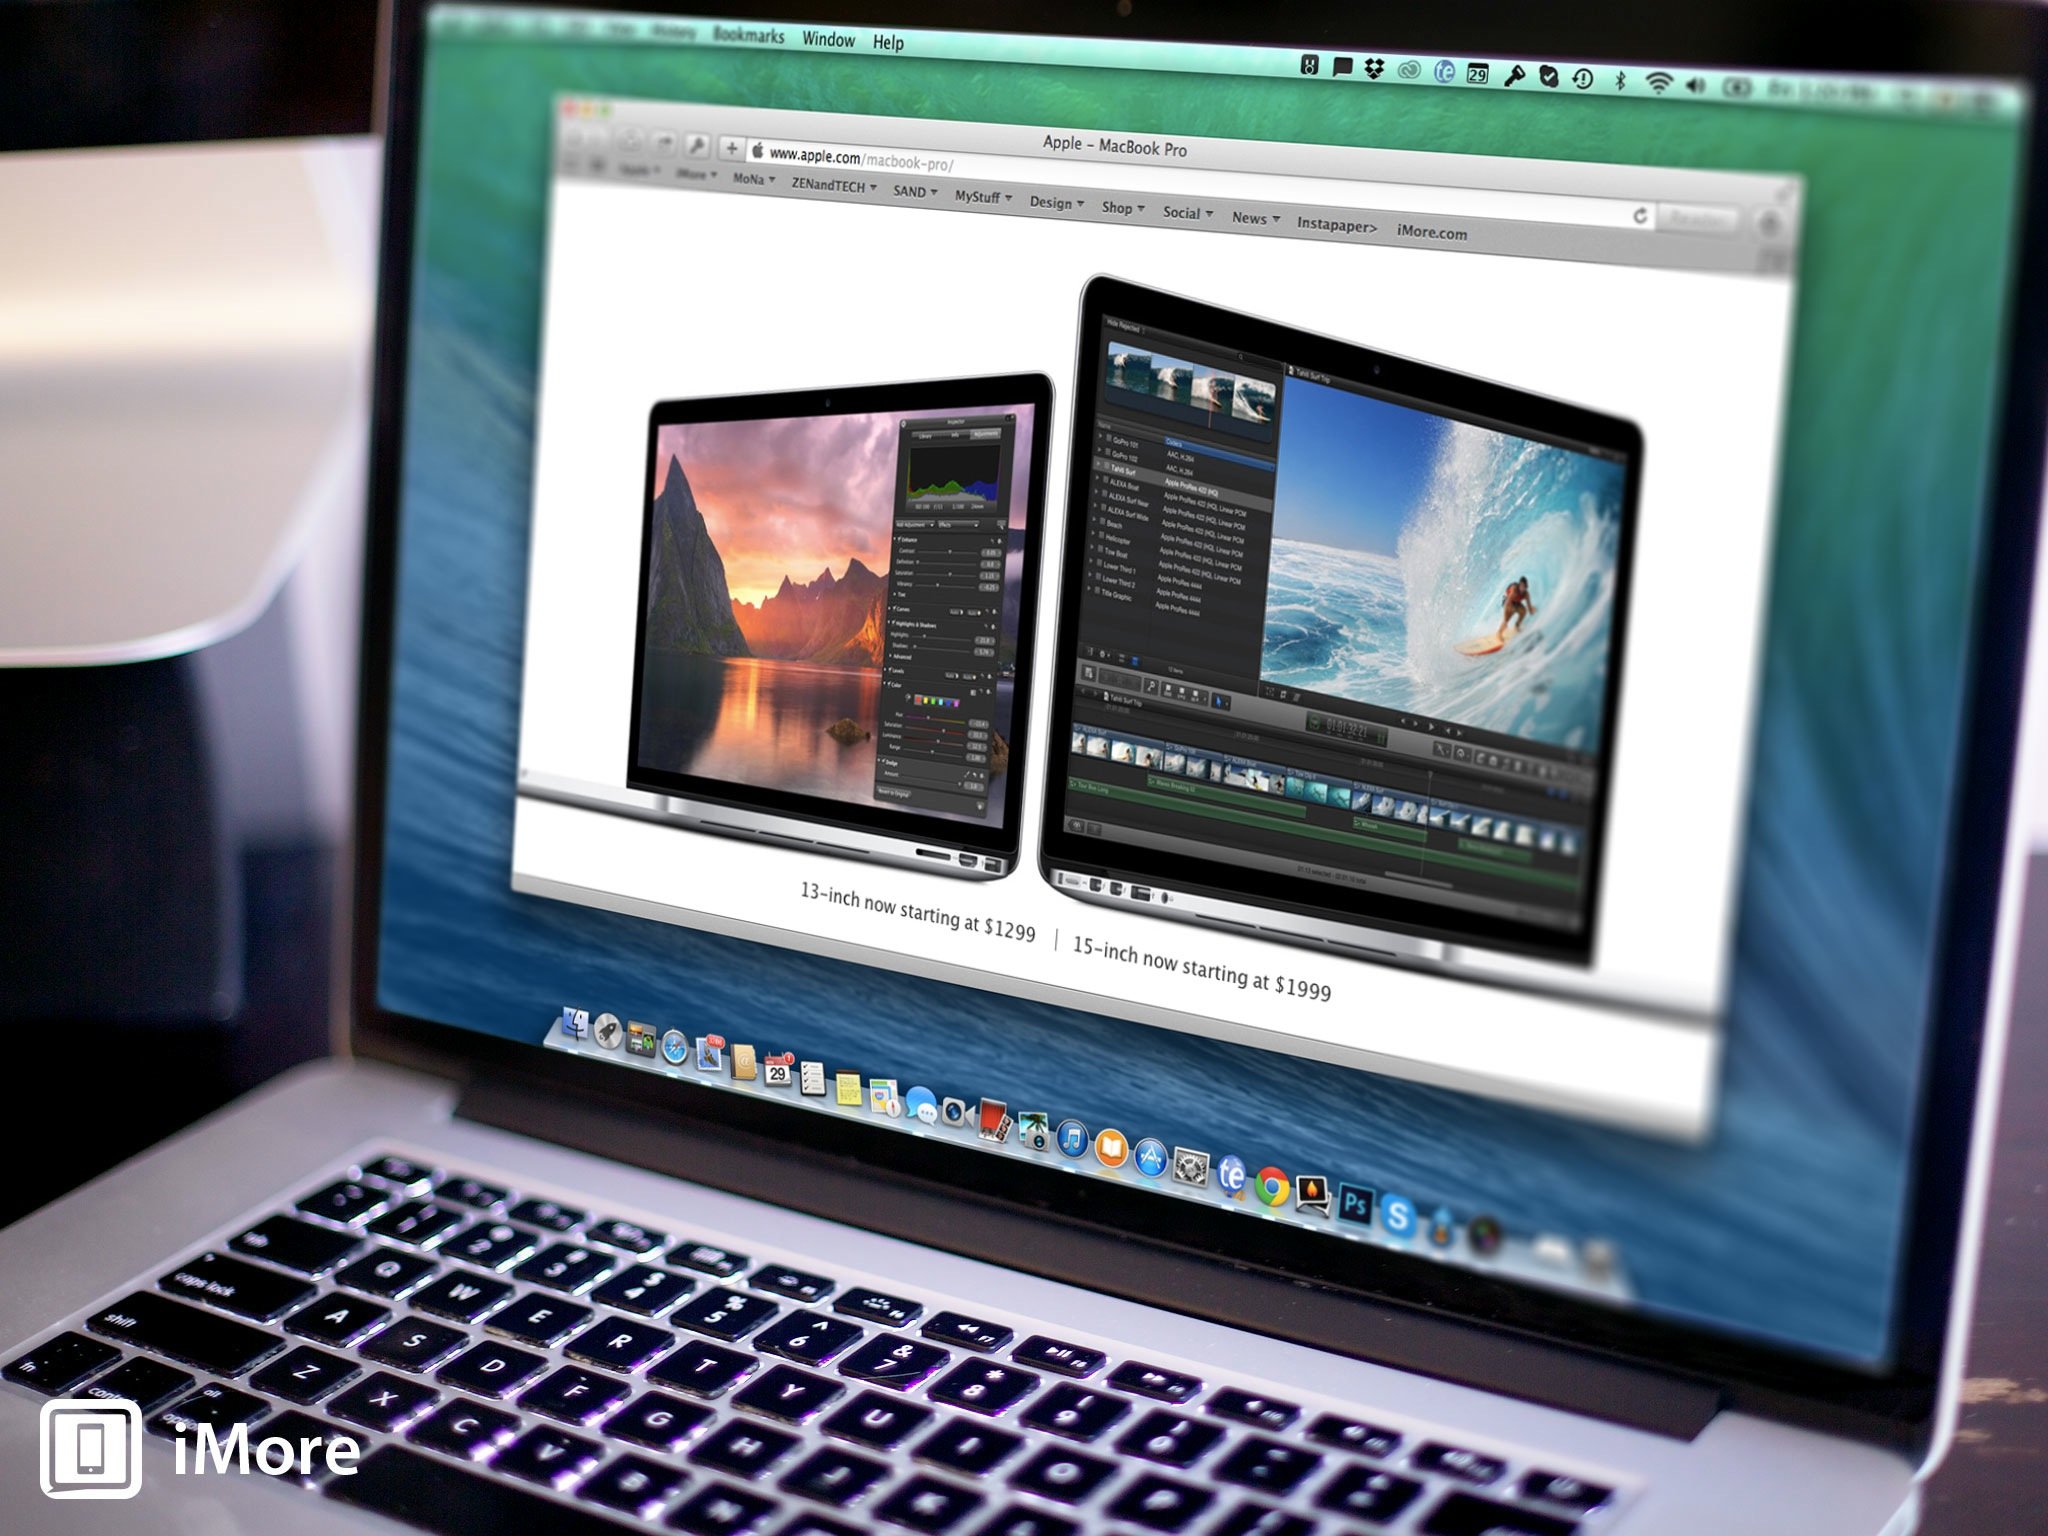 MacBook Pro with Retina display 13-inch vs. 15-inch: Which powerful Mac laptop is right for you?